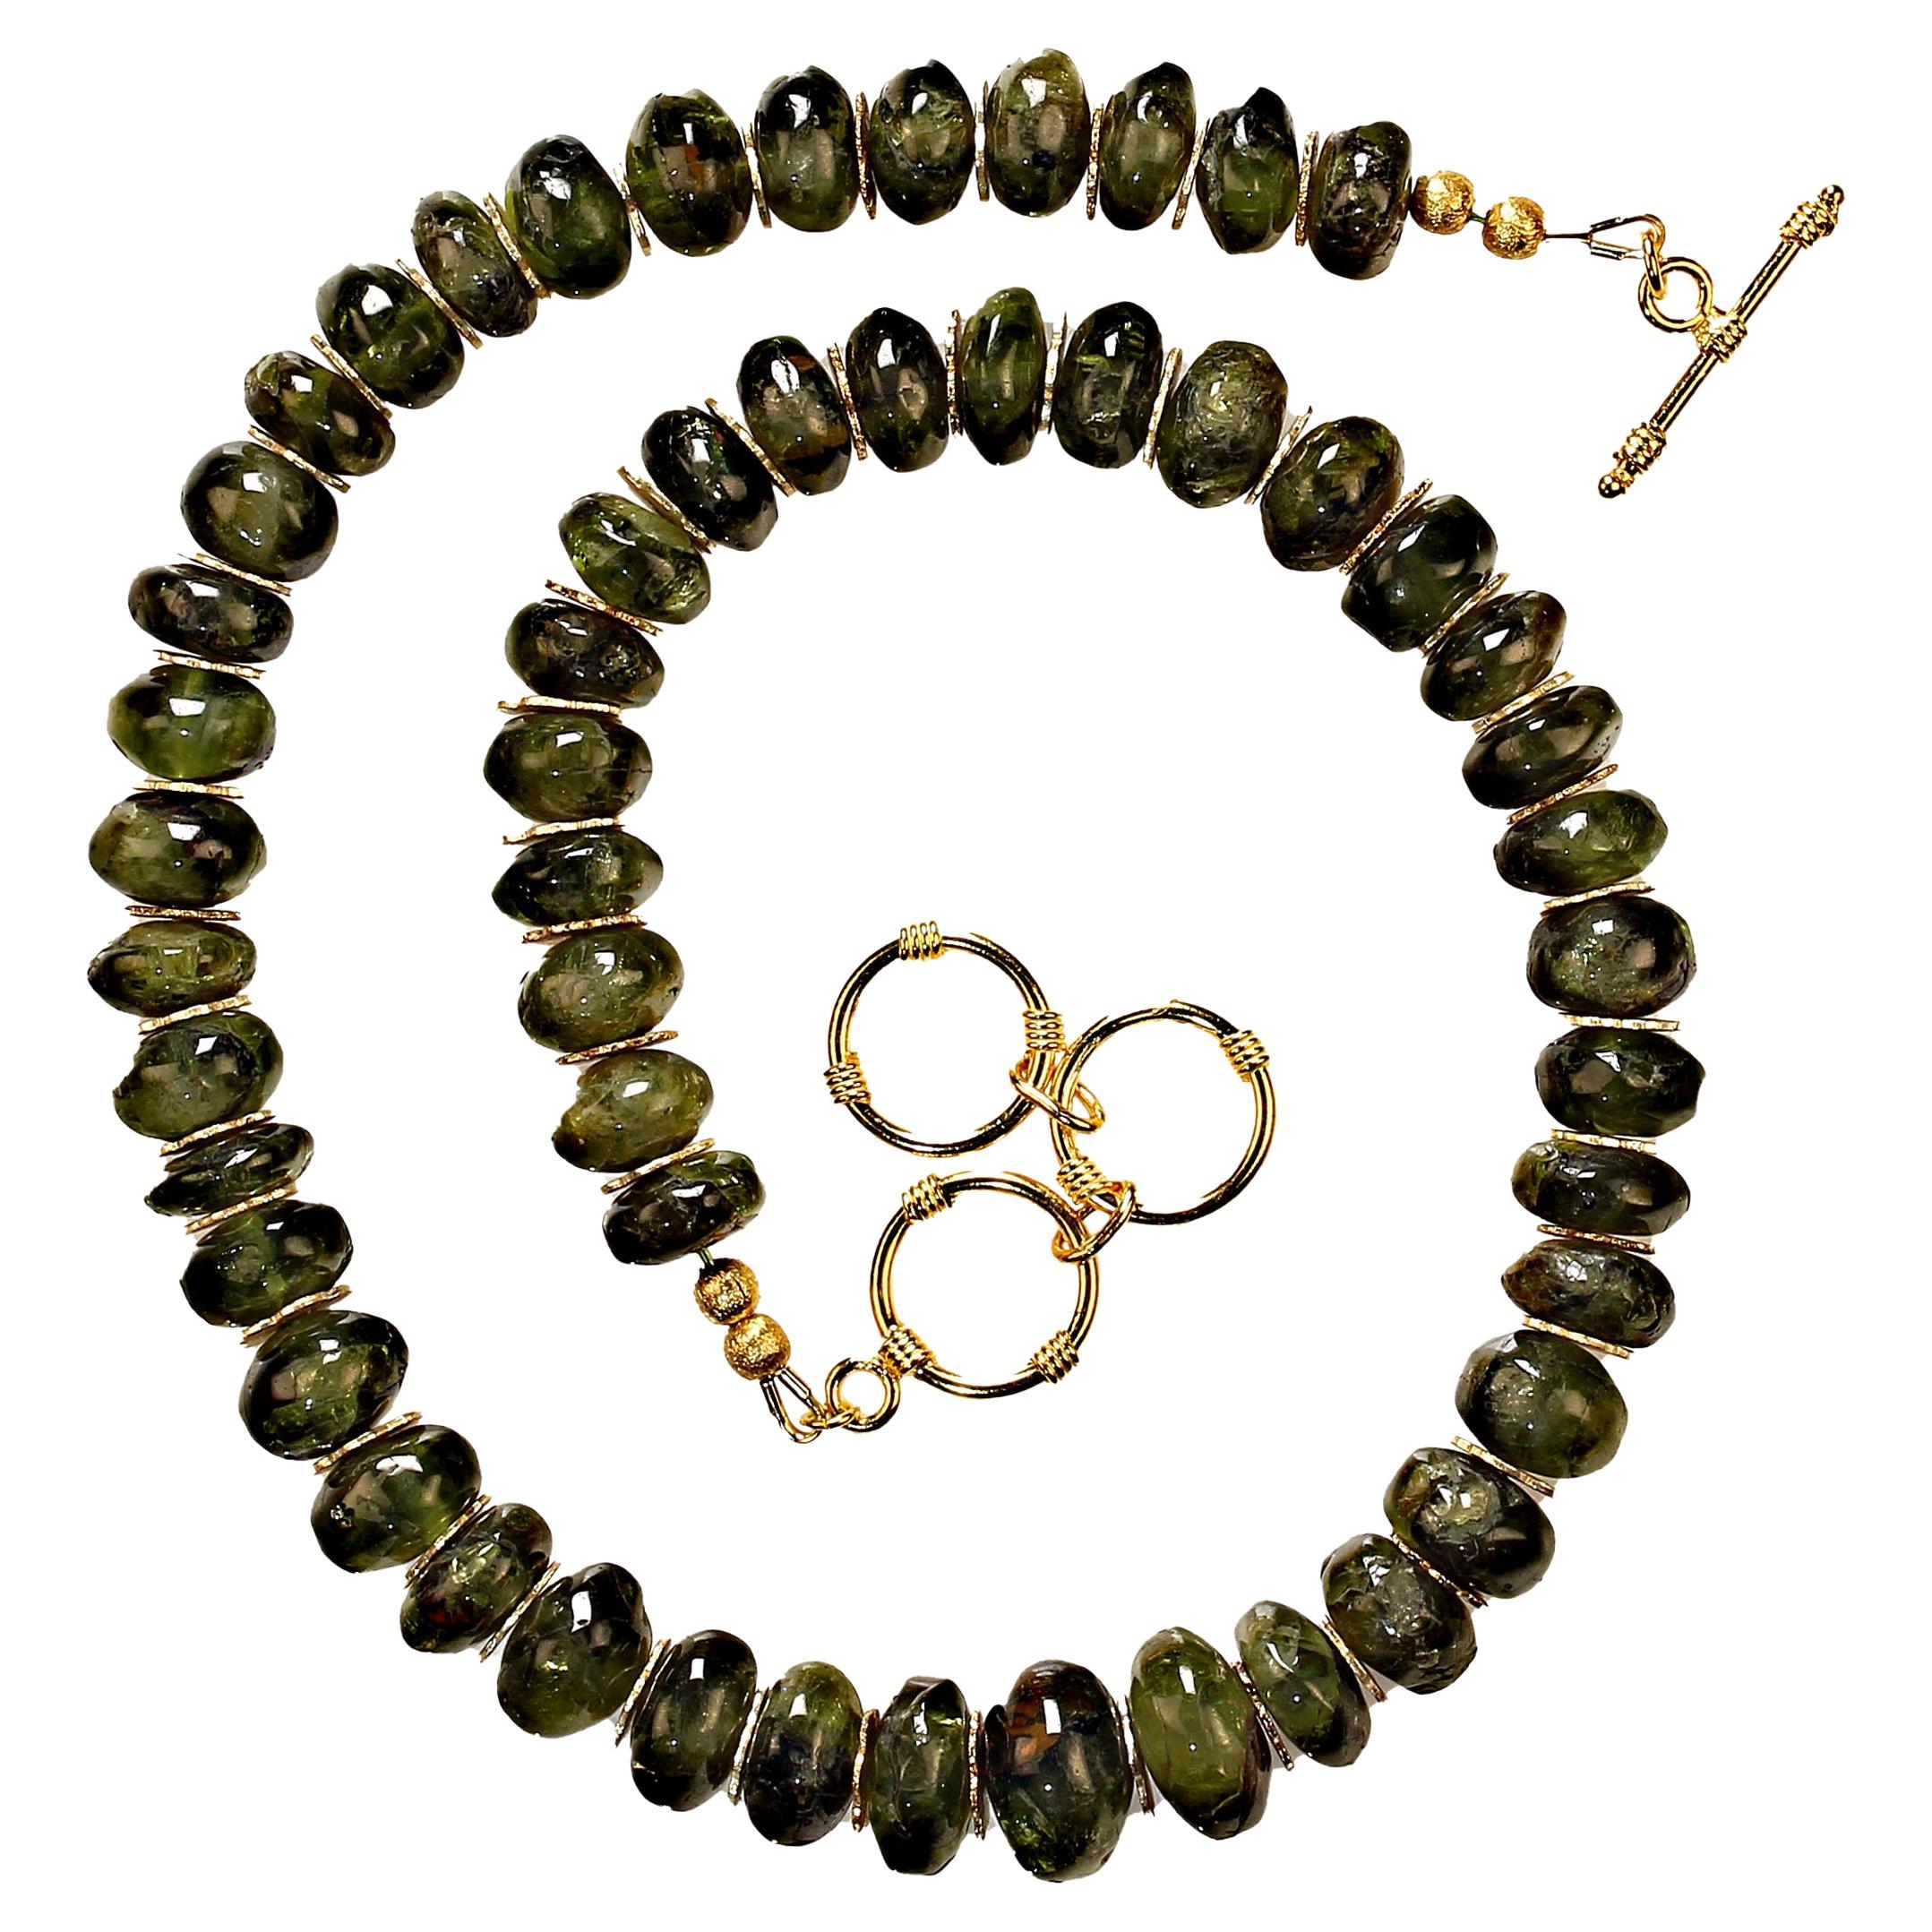 Unique green garnet necklace of highly polished graduated rondelles.  This 19-inch necklace features goldy daisies that enhance the natural green garnet tone.  The 3-loop gold-plate toggle clasp creates some sizing variables. MN2334